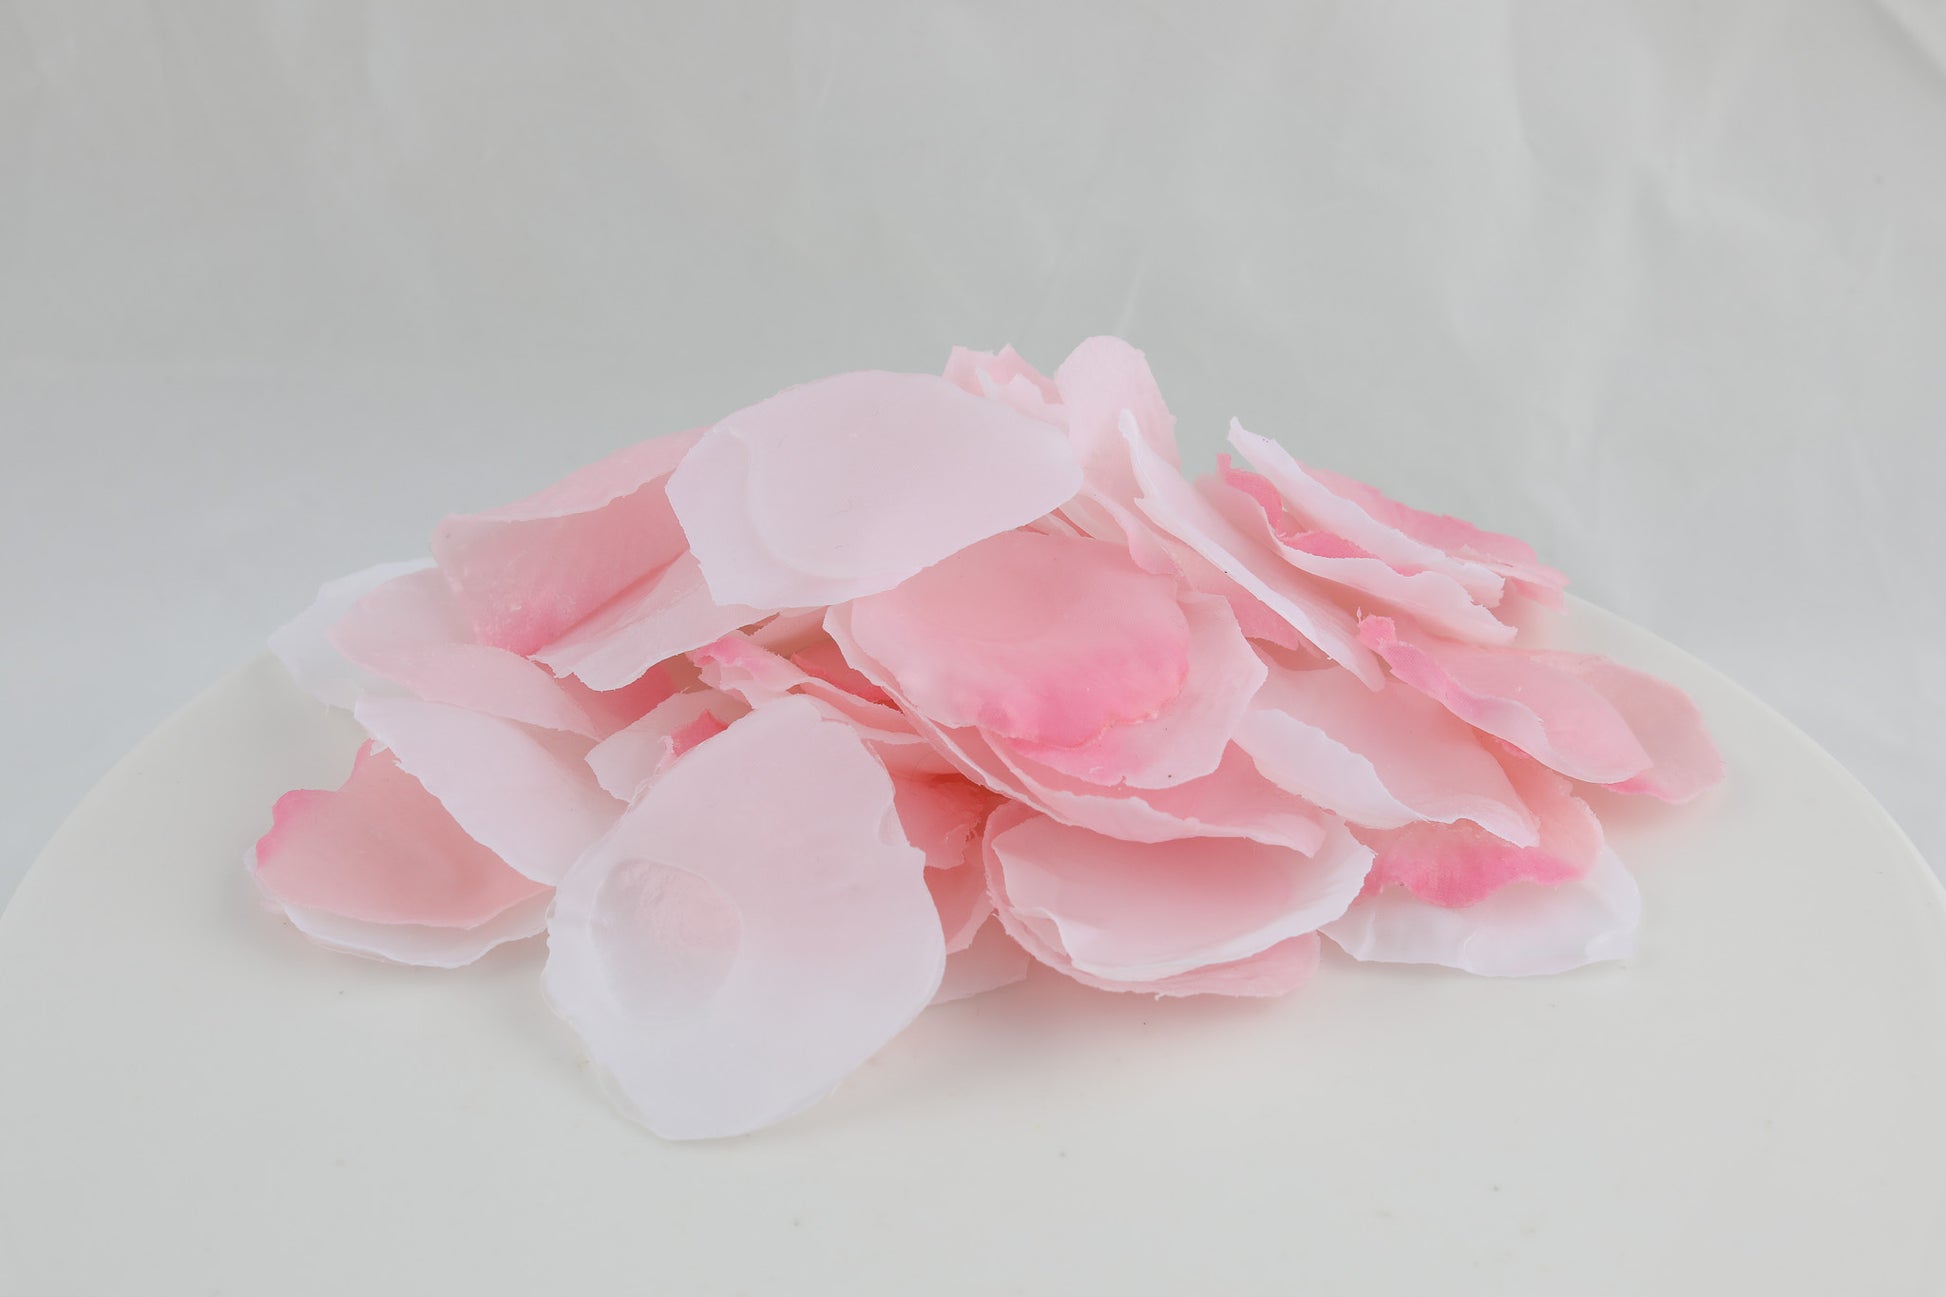 soap shaped as flower petals in white and light pink